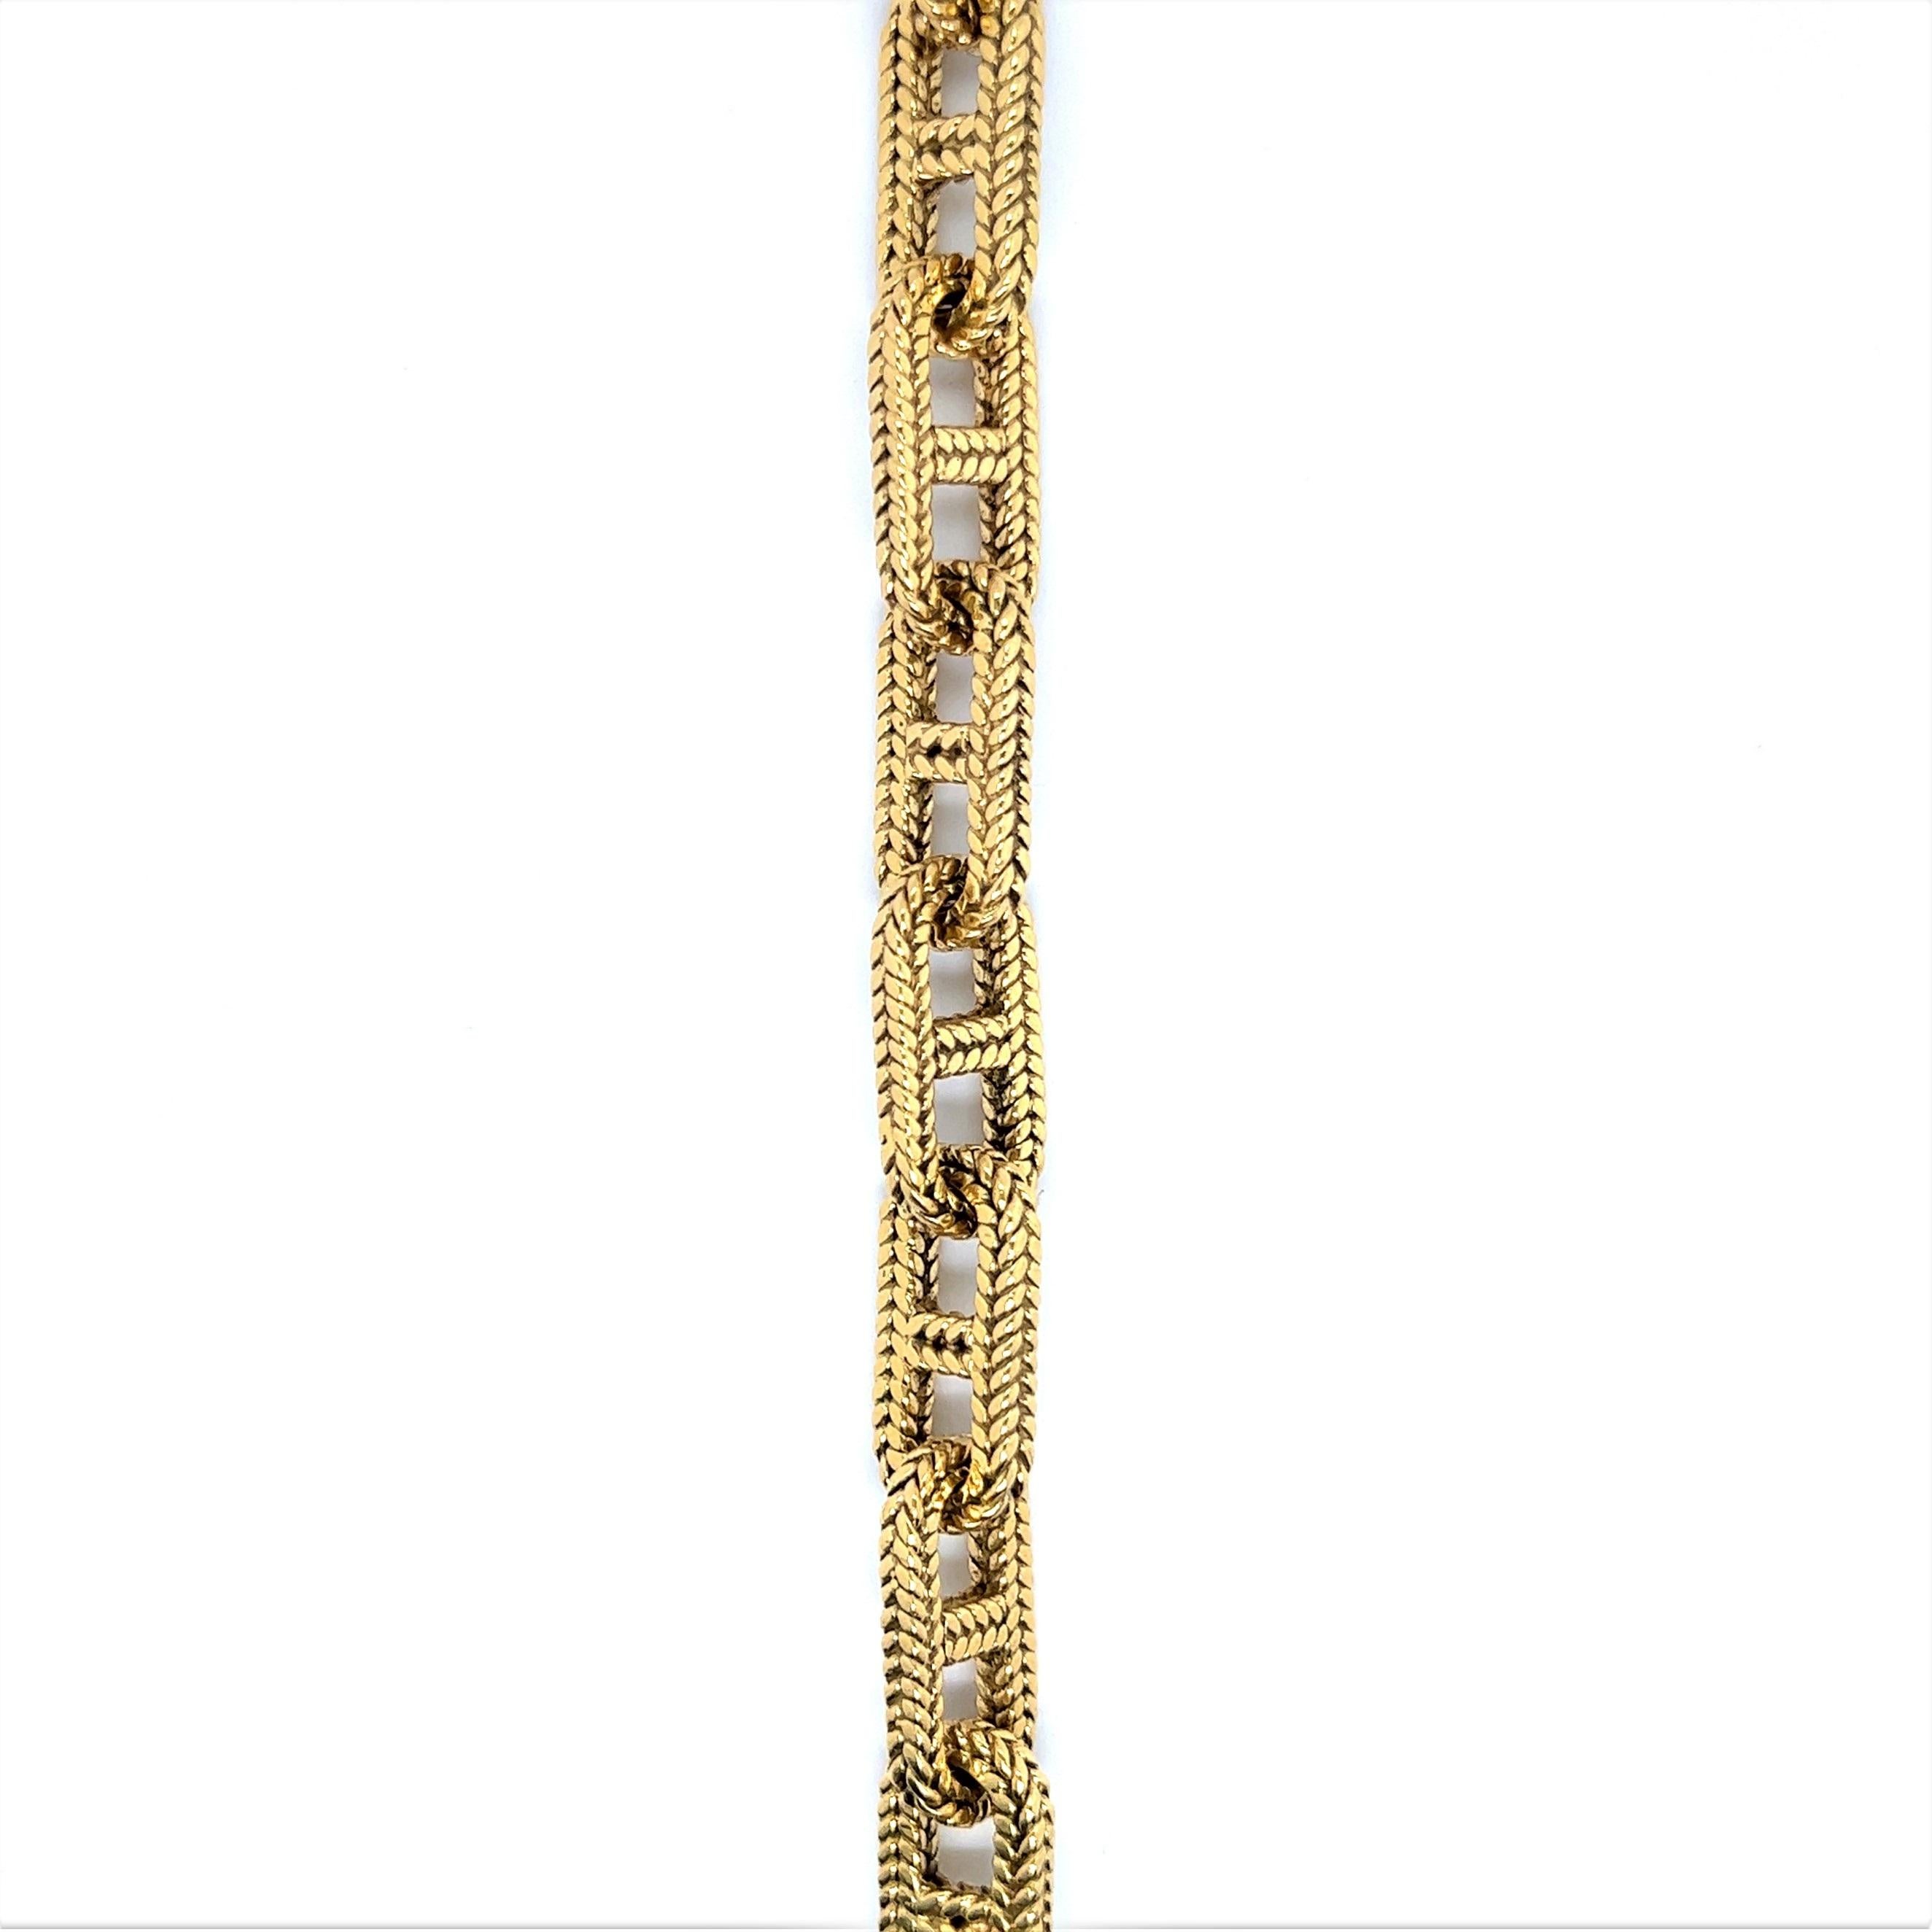 Chain Bracelet “Chaine D'ancre” in 18 Karat Yellow Gold 1